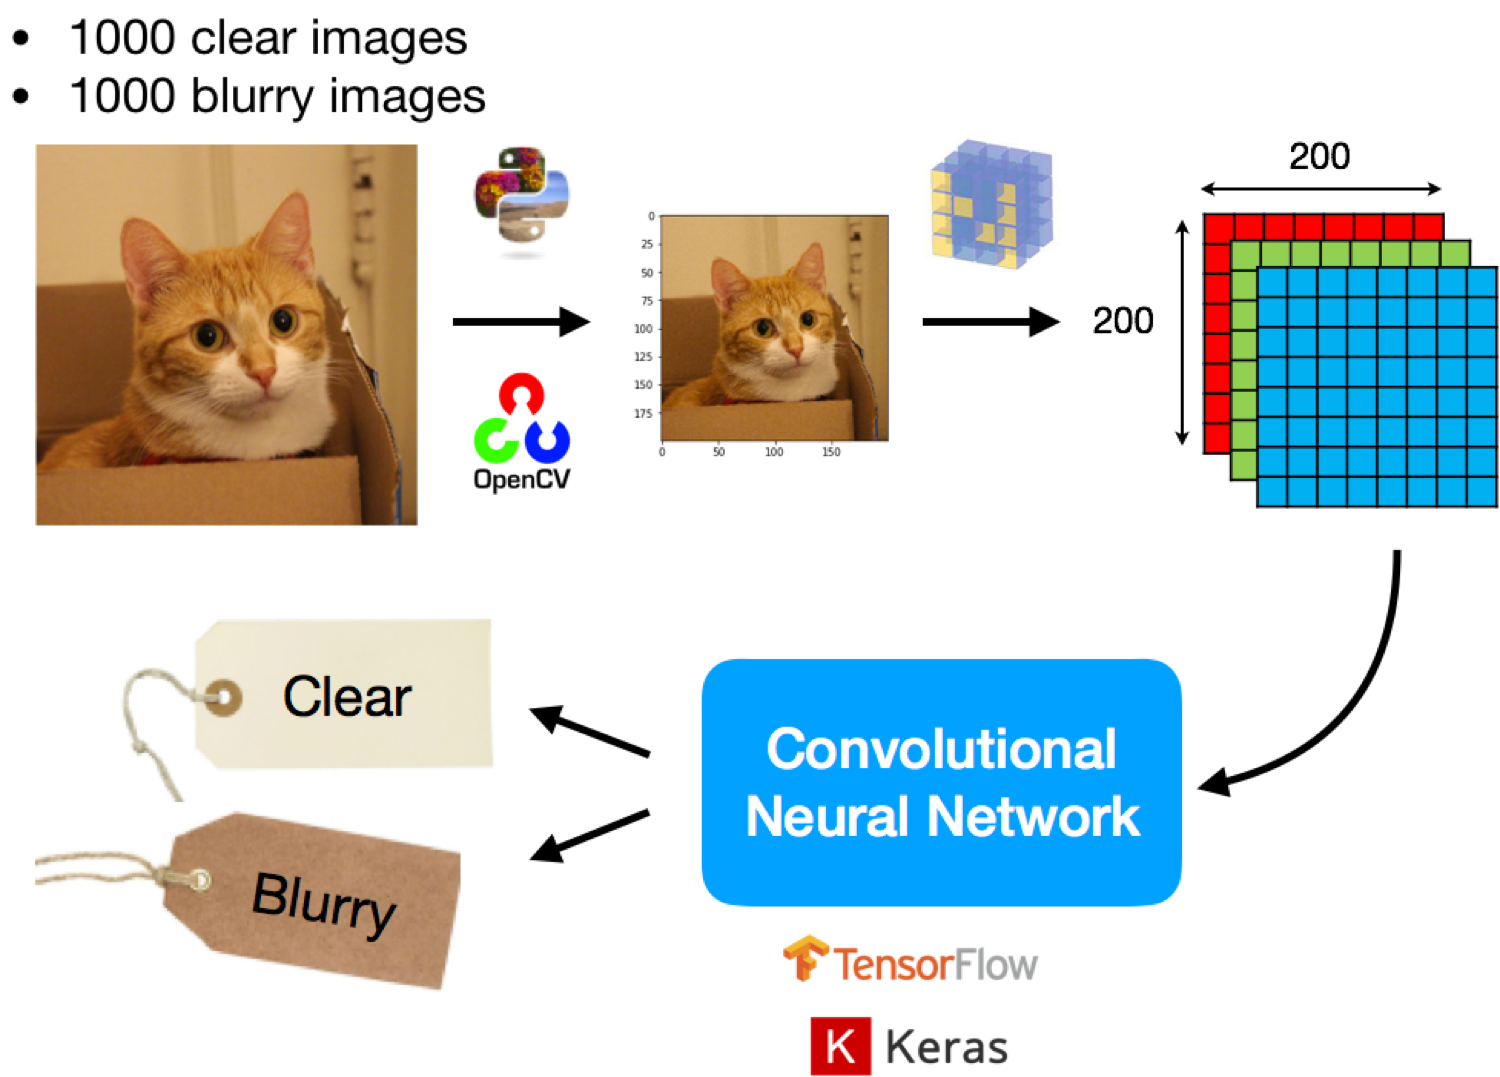 How to get background blur using Deep Learning?